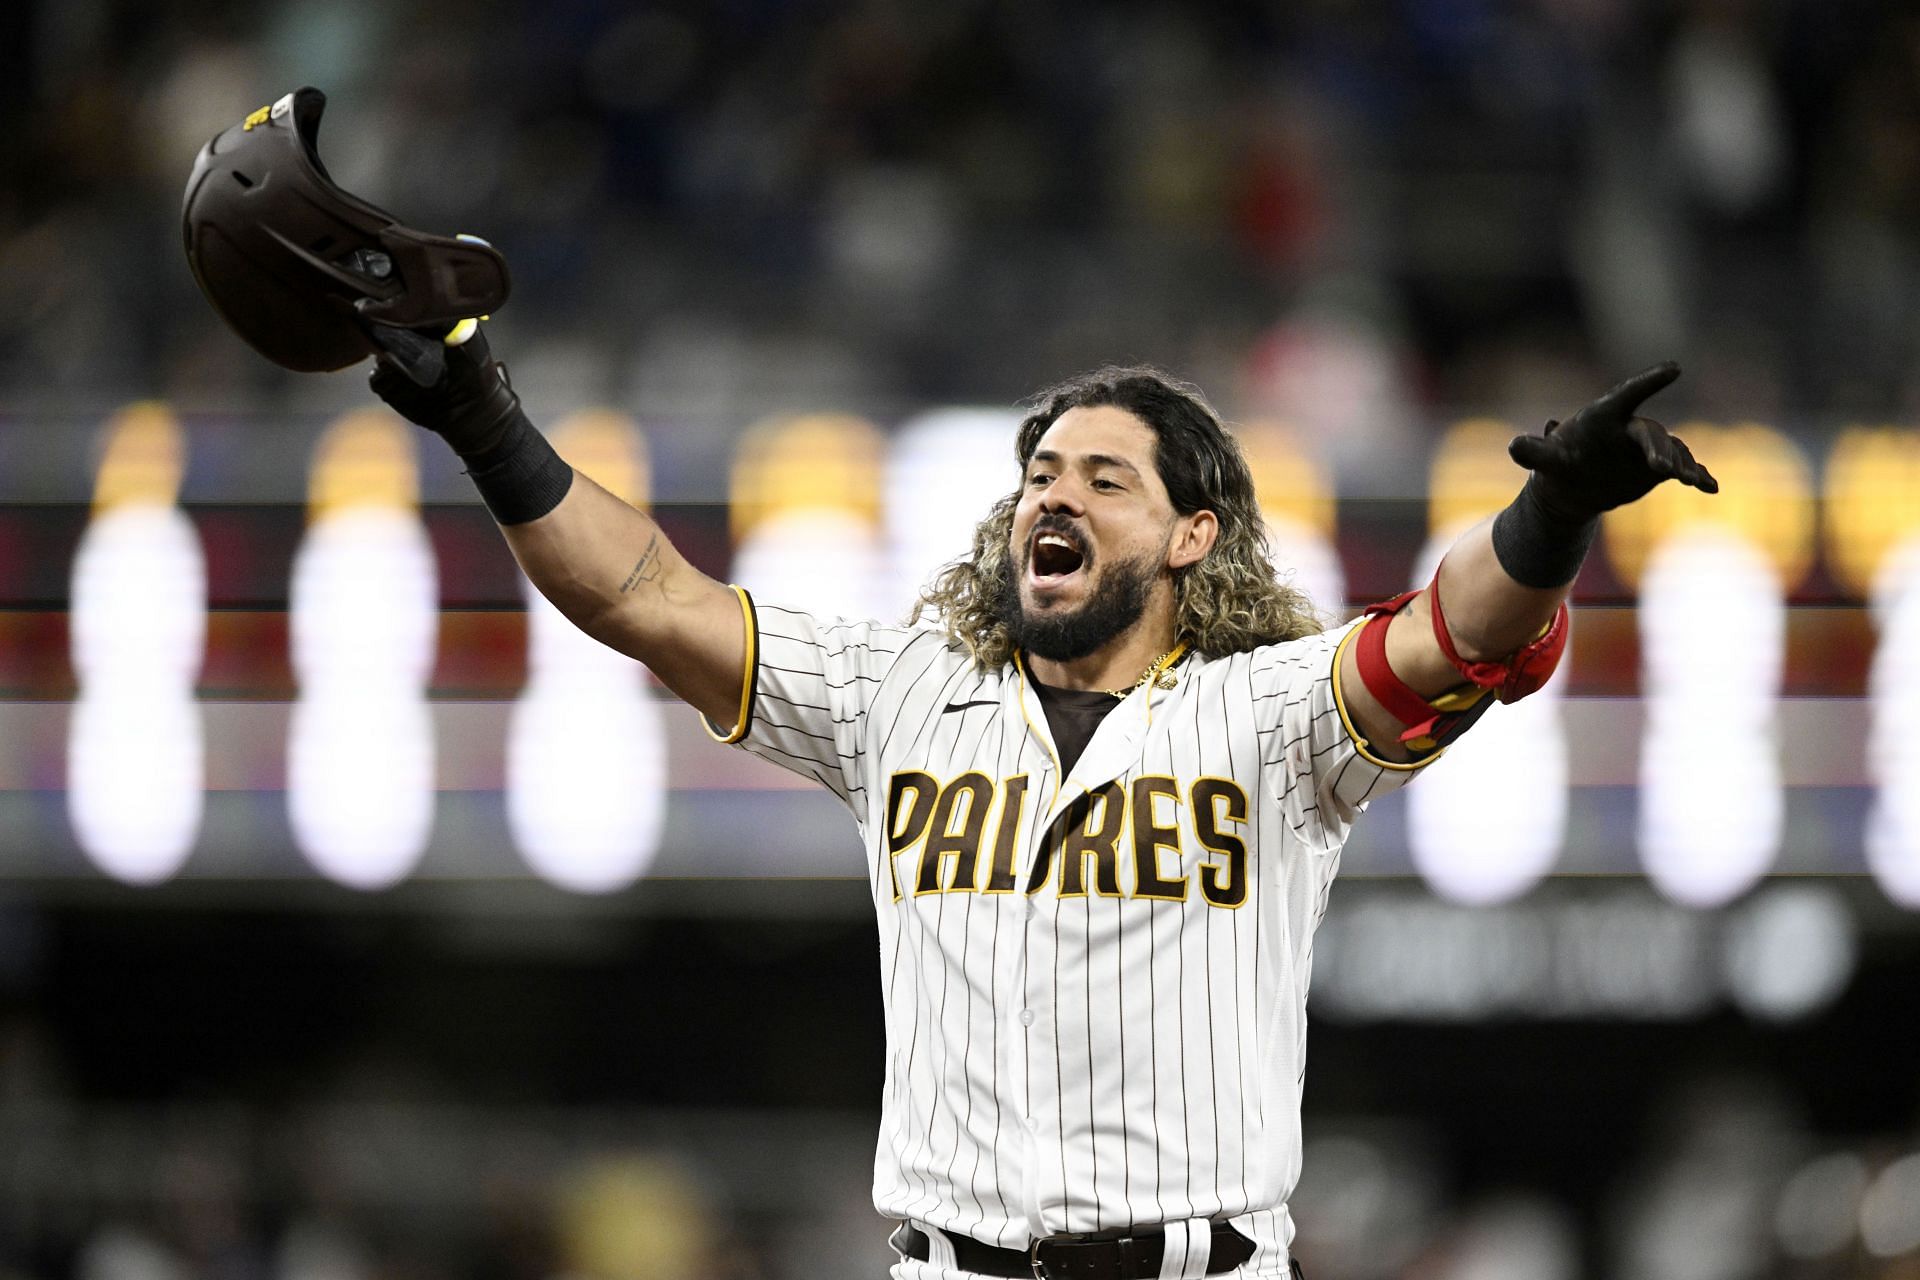 Red Sox sign Jorge Alfaro to major league contract in catching shakeup 